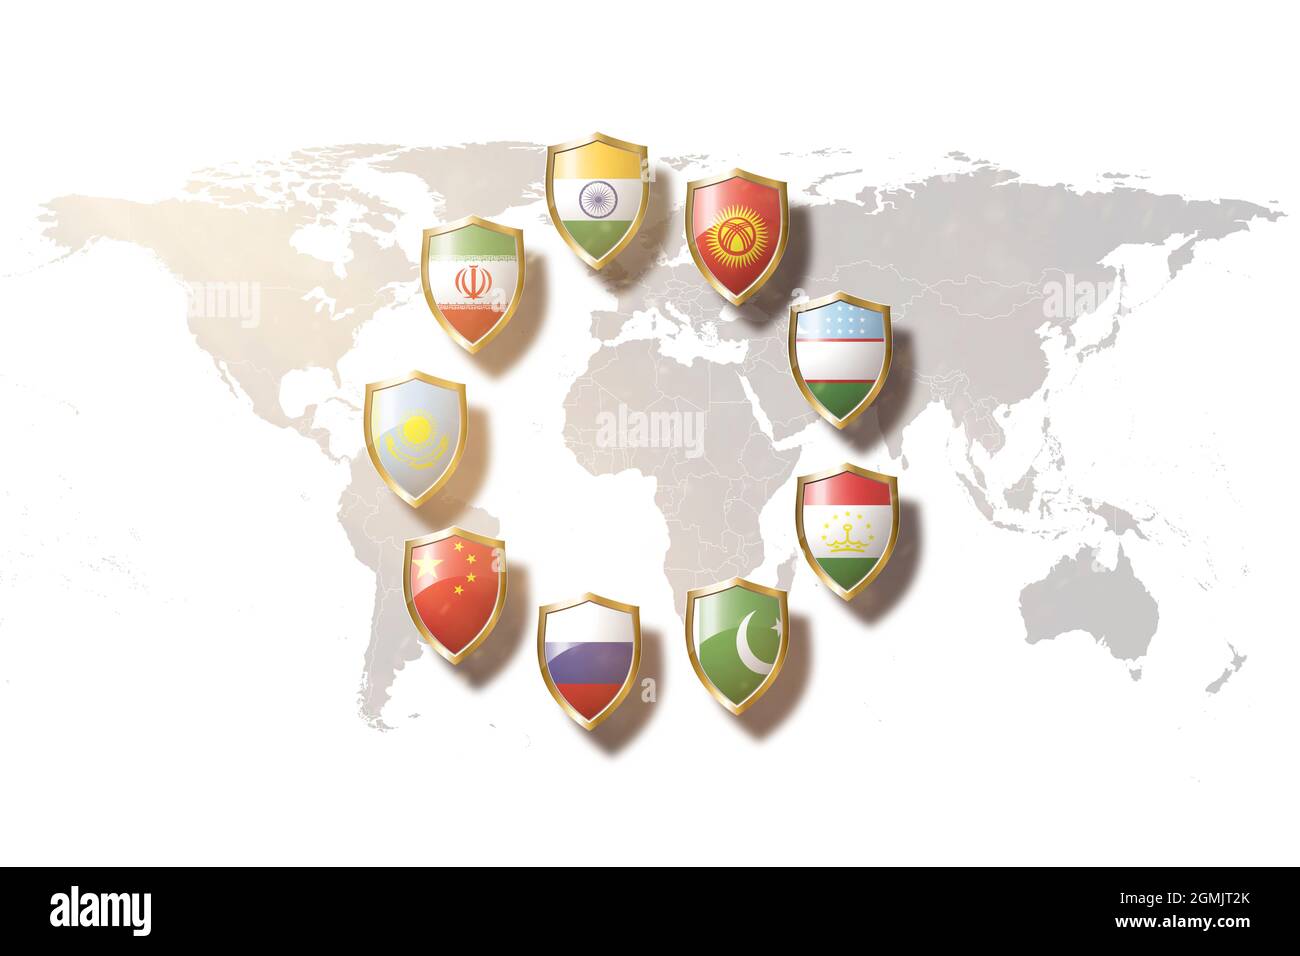 Shanghai Cooperation Organization (SCO) countries flags in golden shield on world map background.sco new permanent member iran. Stock Photo